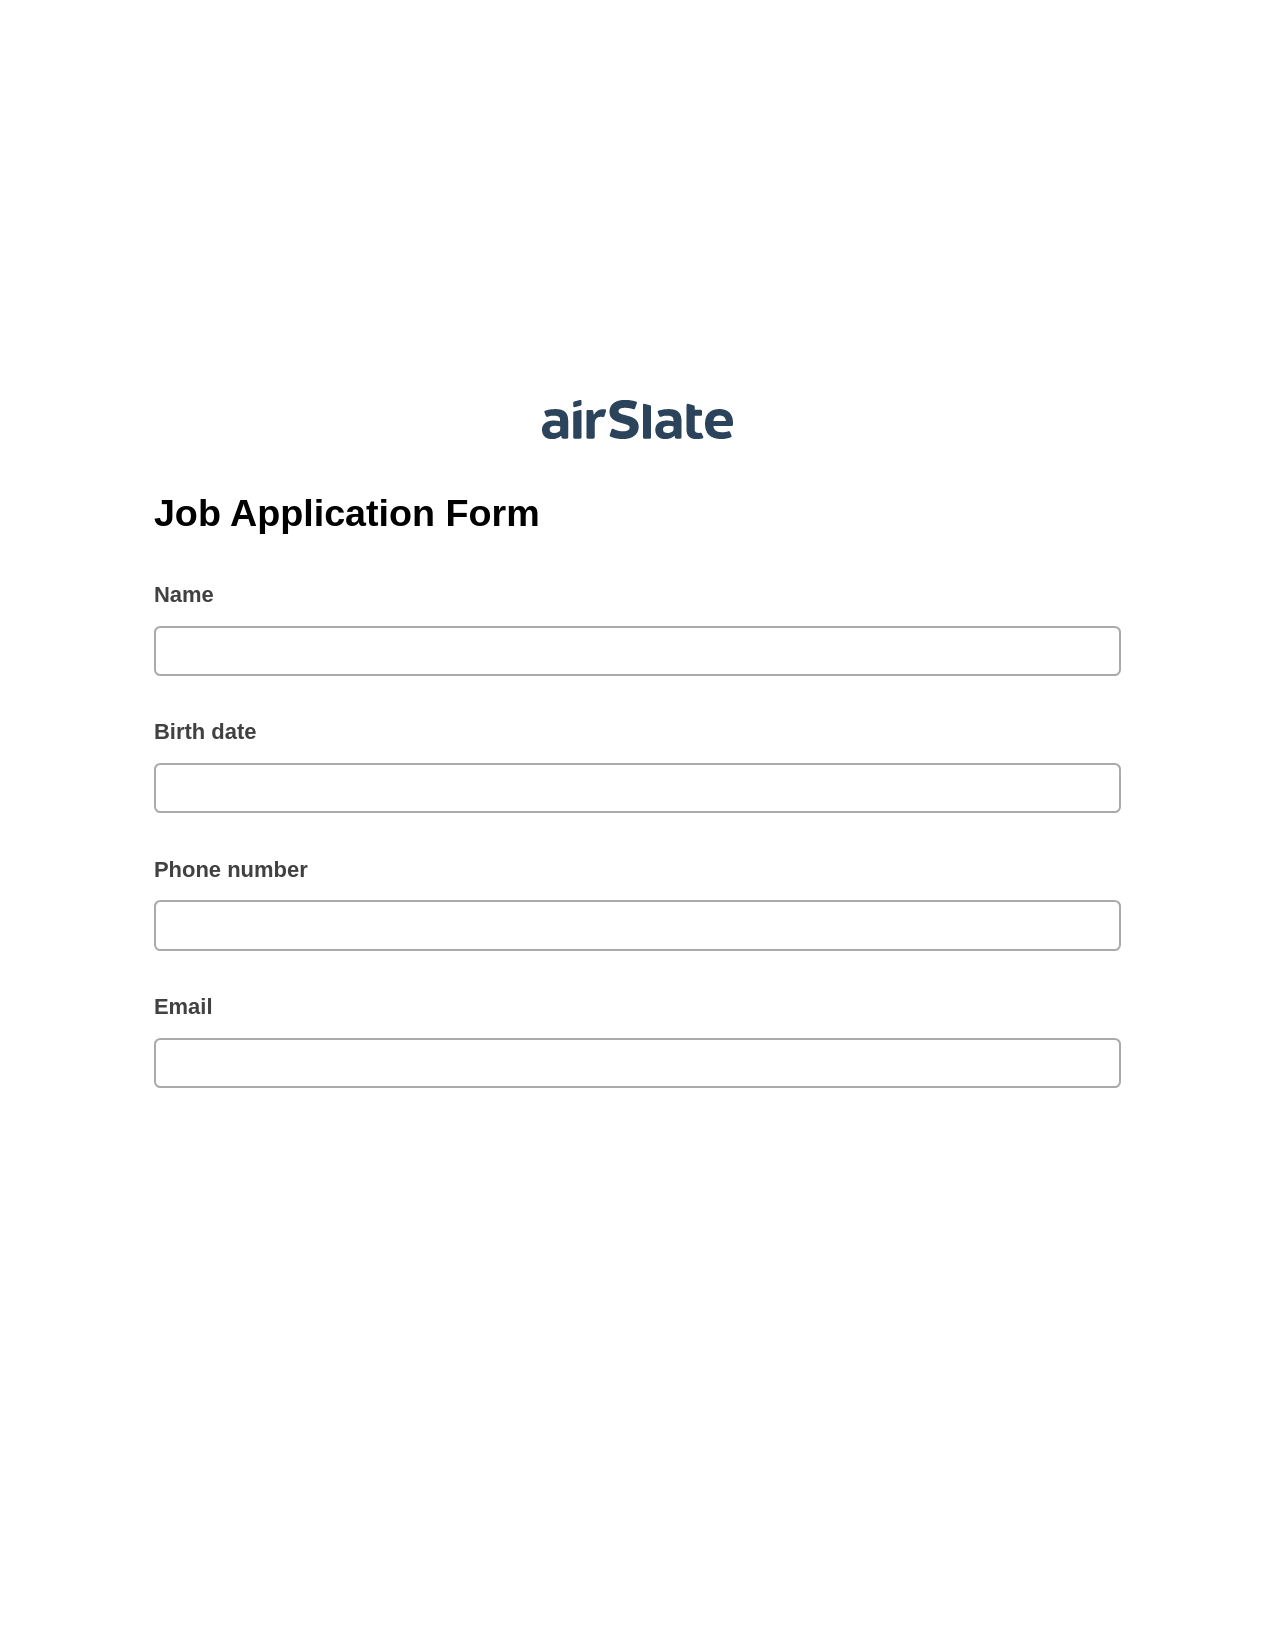 Multirole Job Application Form Pre-fill from CSV File Bot, Pre-fill with Custom Data Bot, Post-finish Document Bot